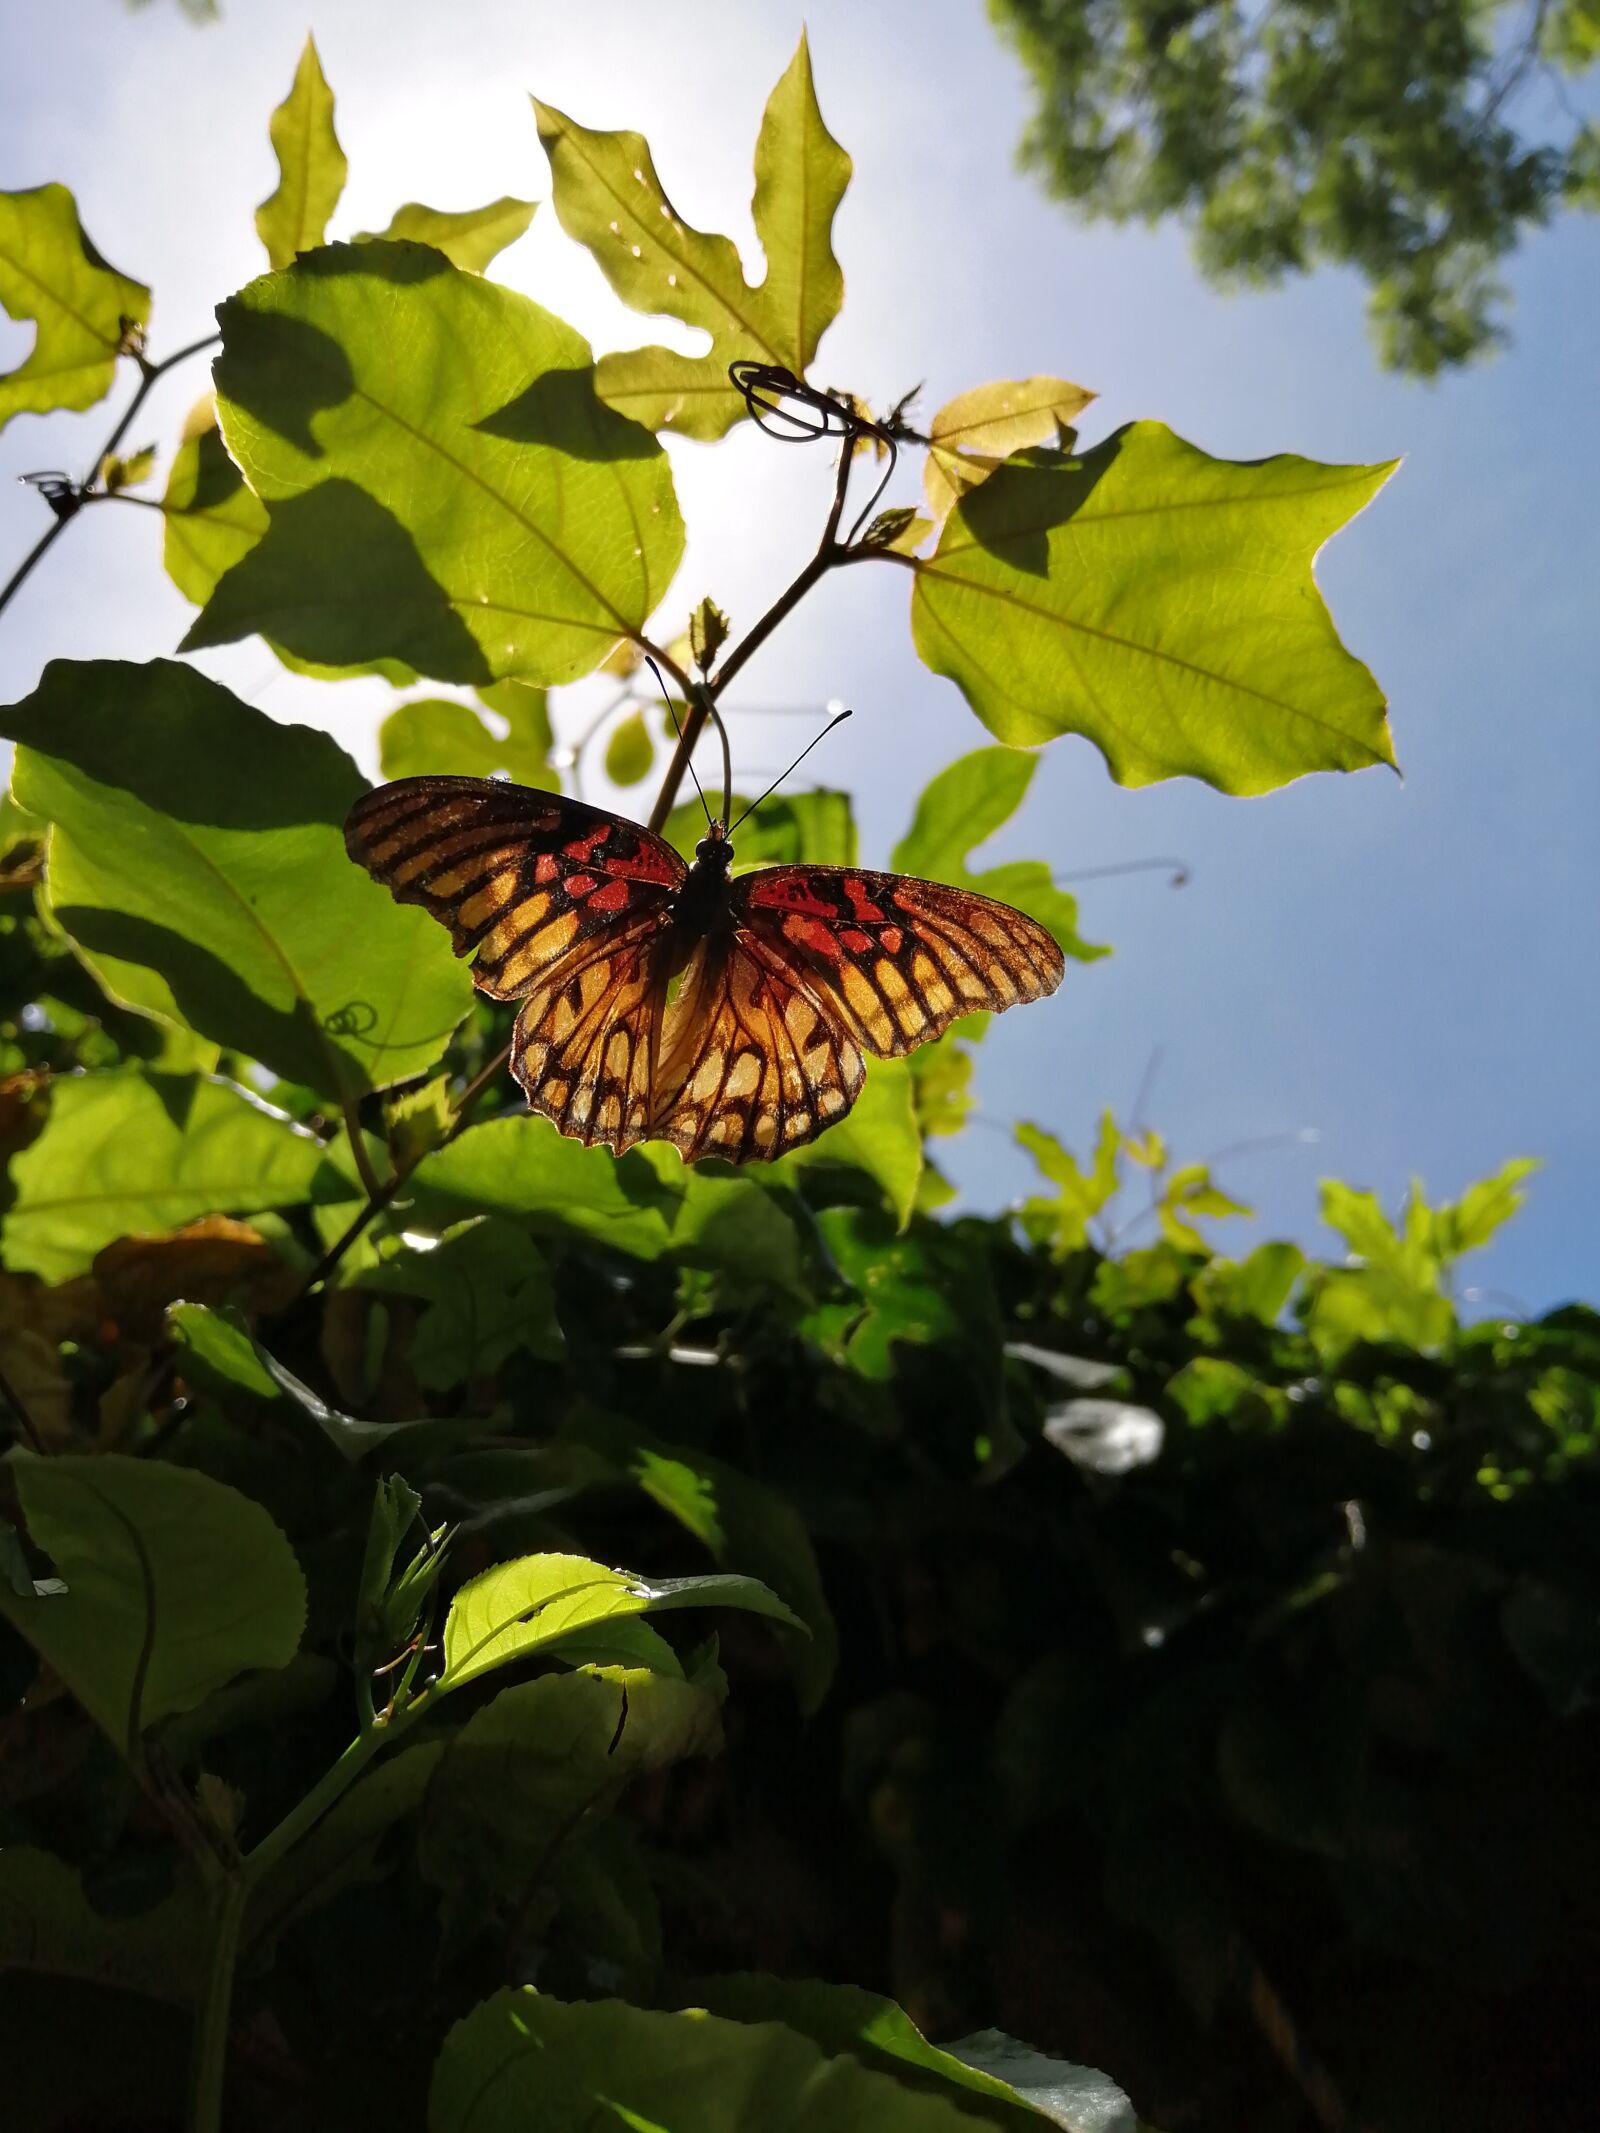 HUAWEI JKM-LX3 sample photo. Butterfly, field, insects photography